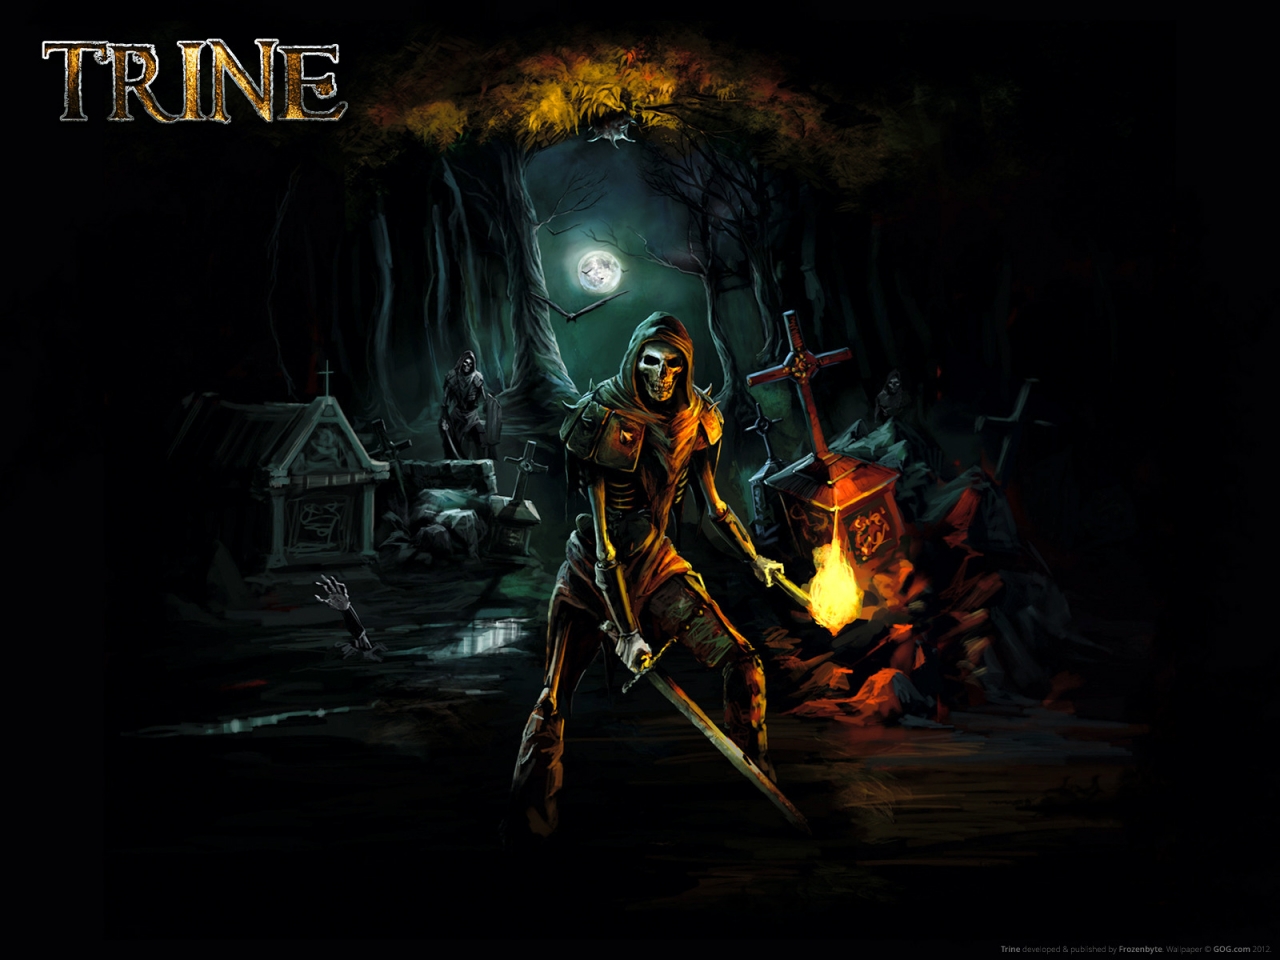 Trine Game for 1280 x 960 resolution